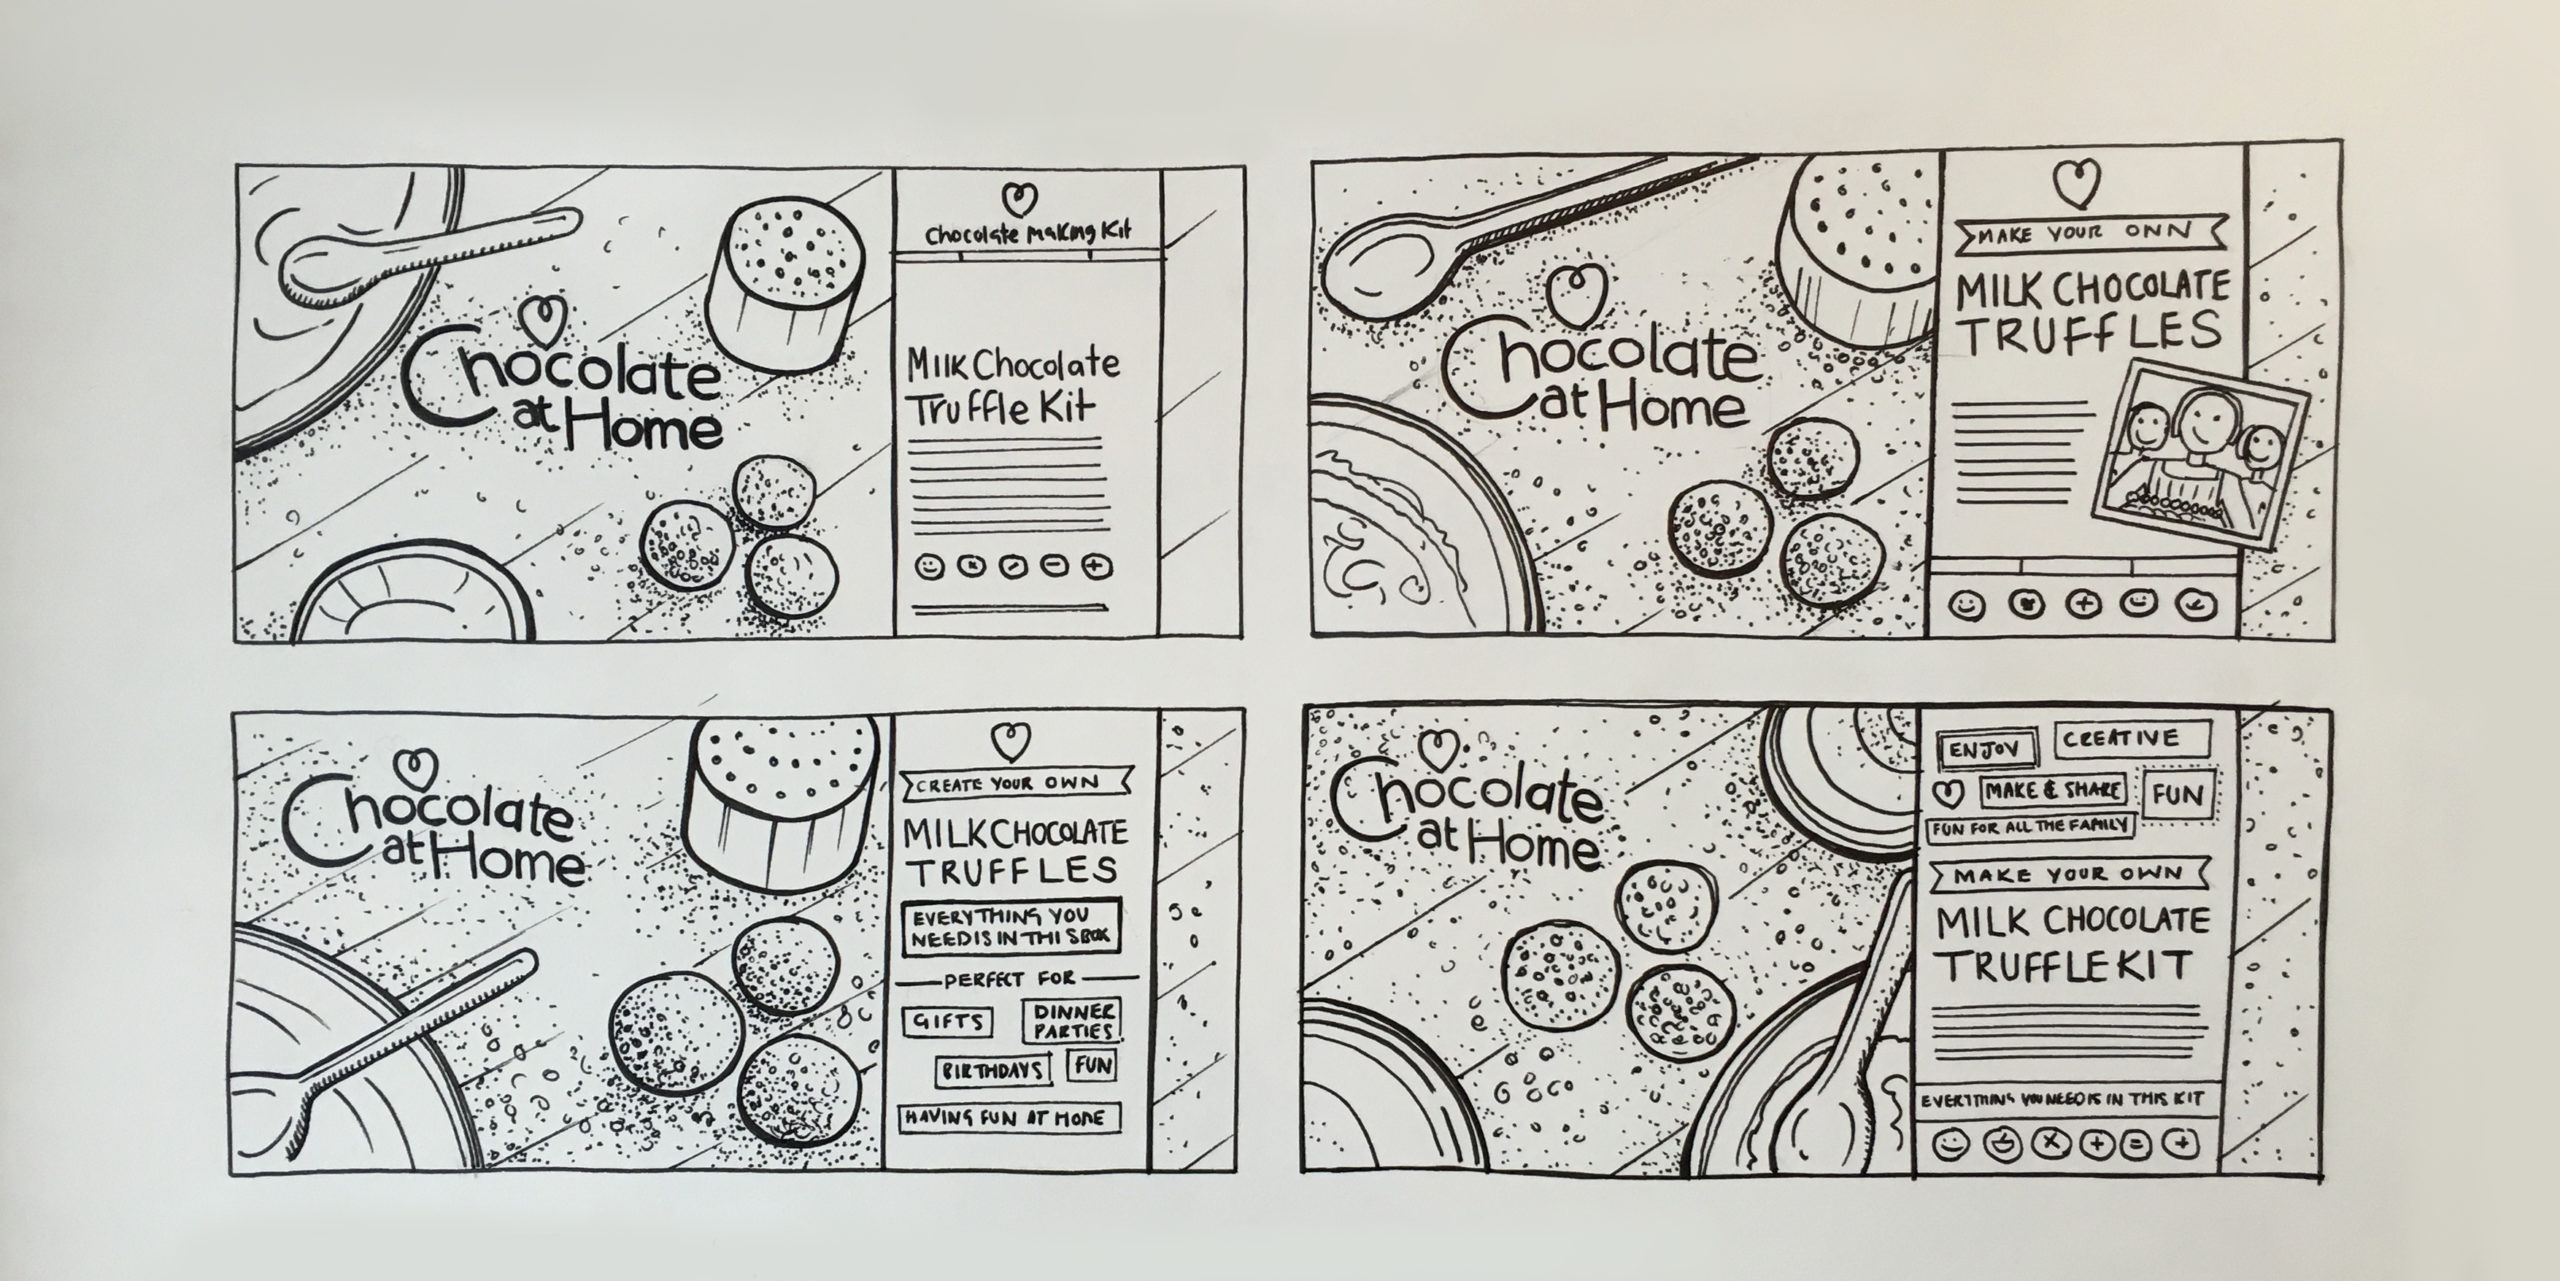 Chocolate at Home Branding & Packaging Sketches